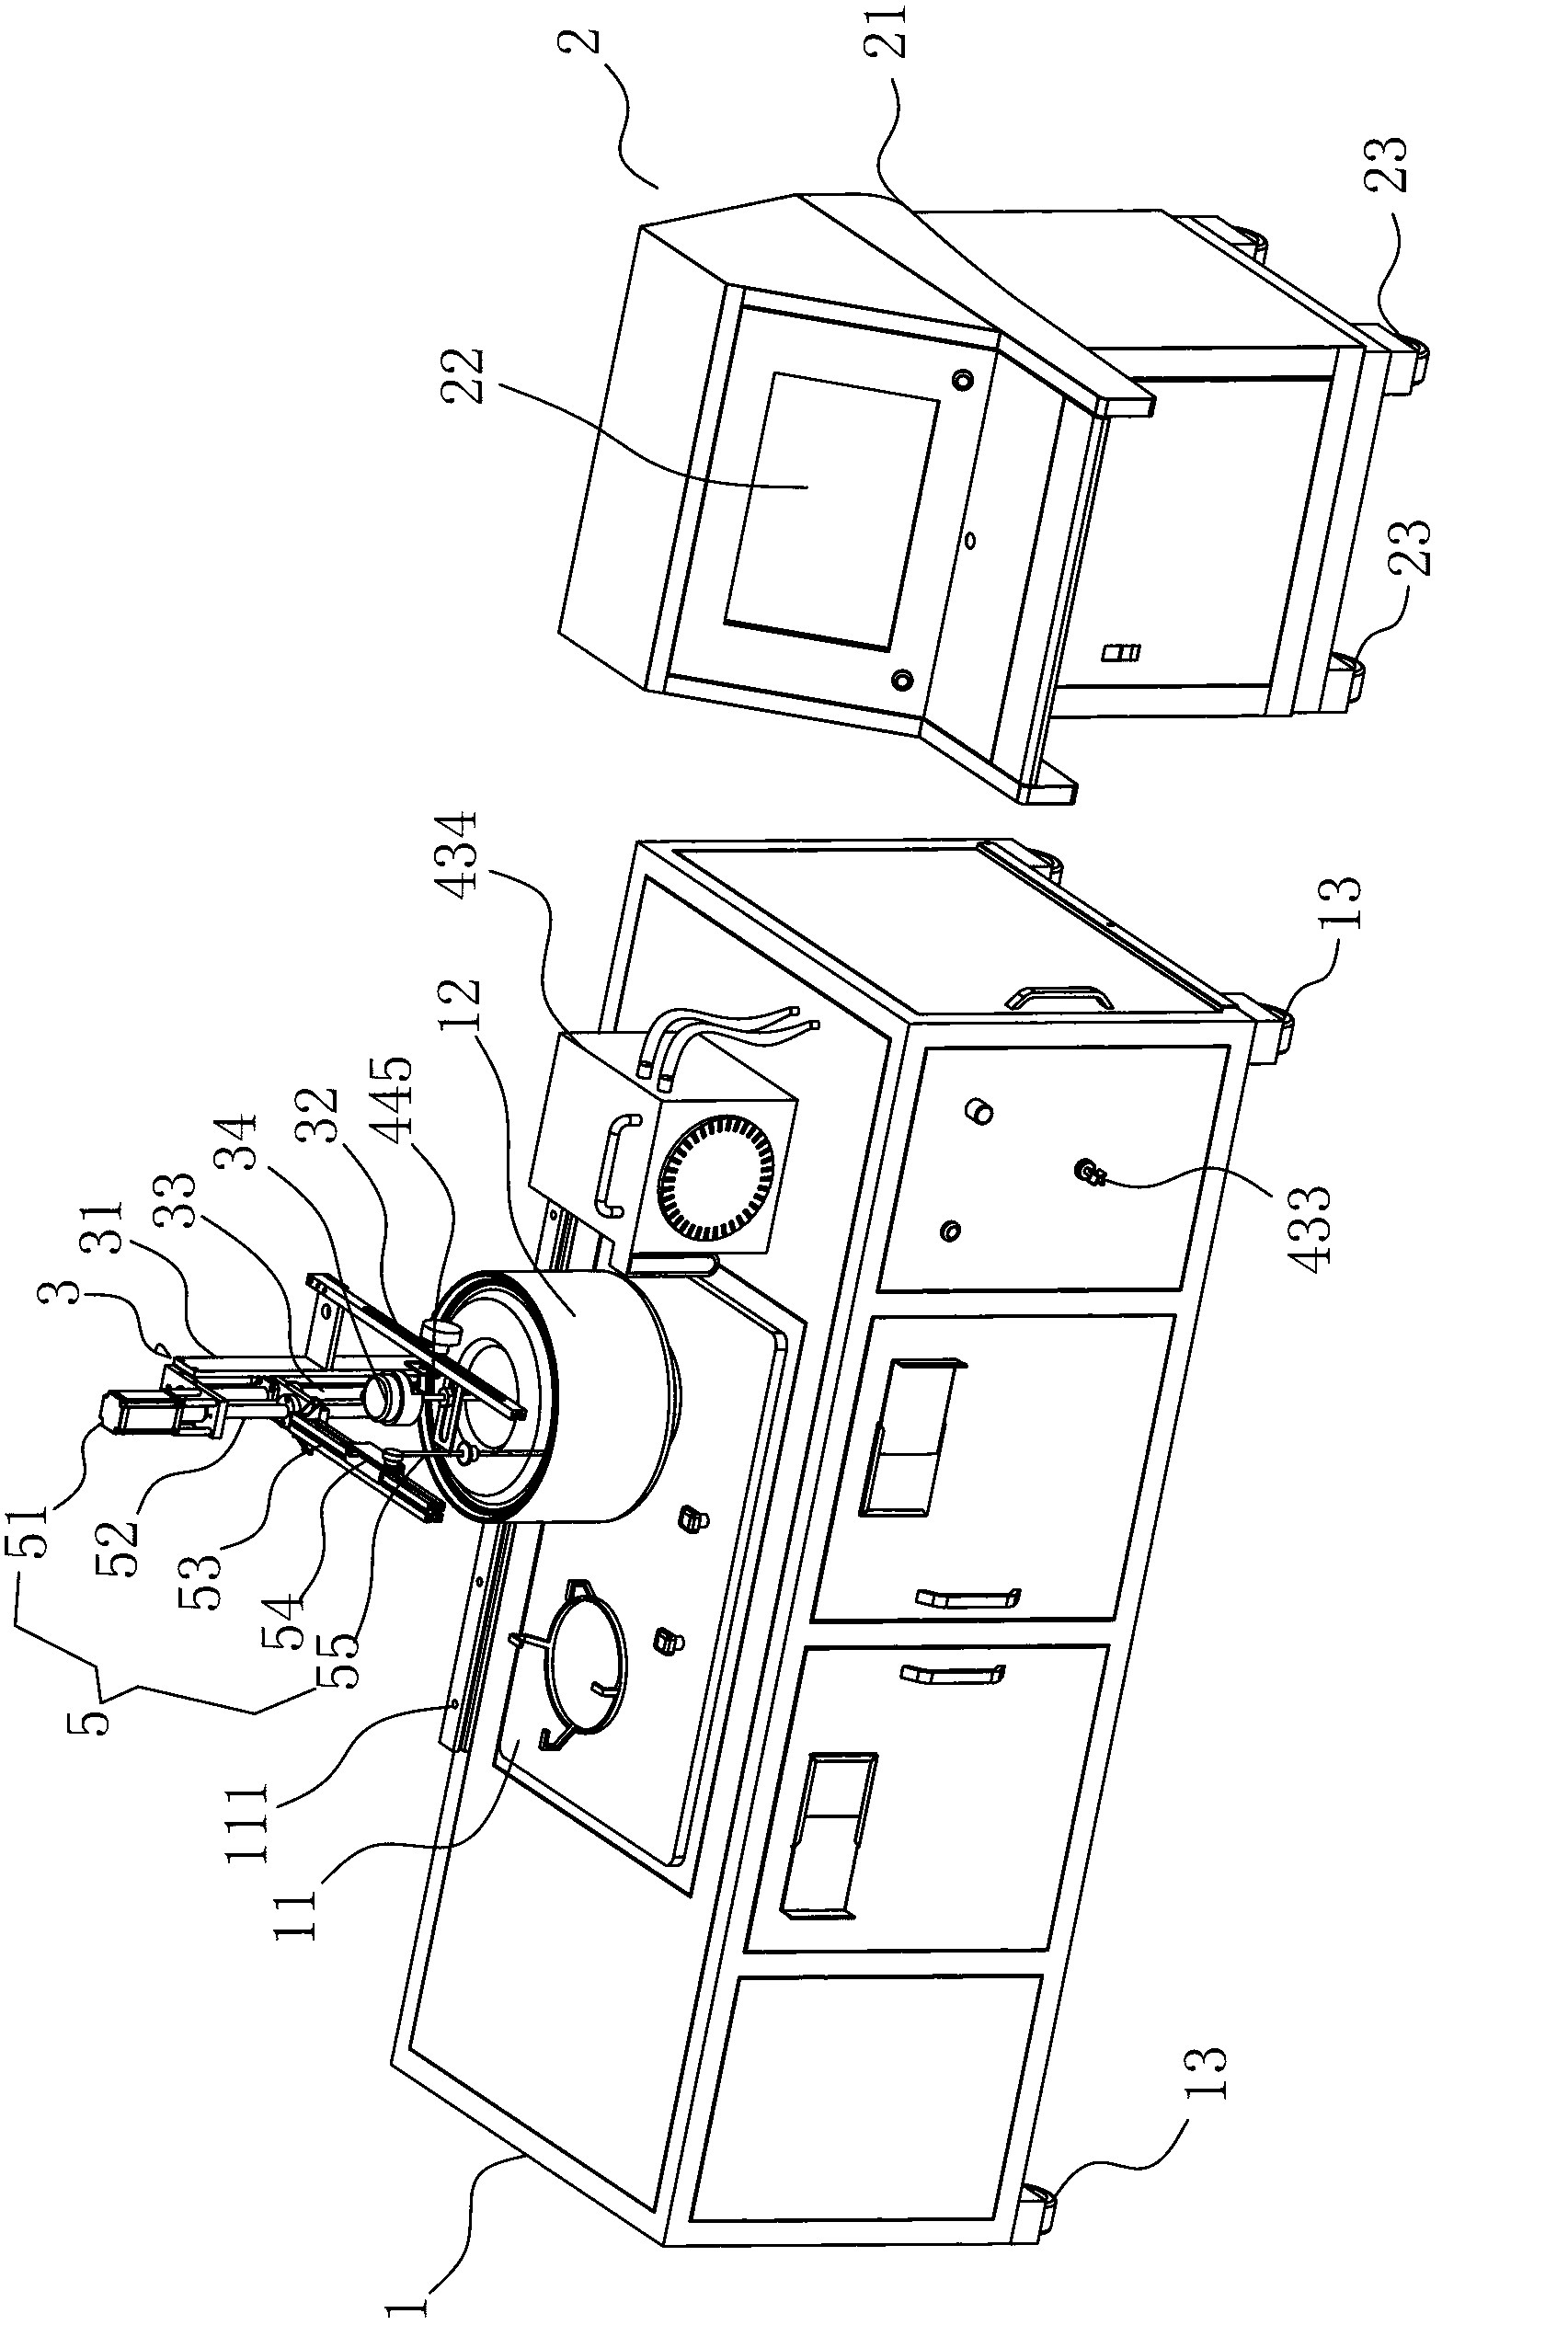 Automatic control test device of gas cooker